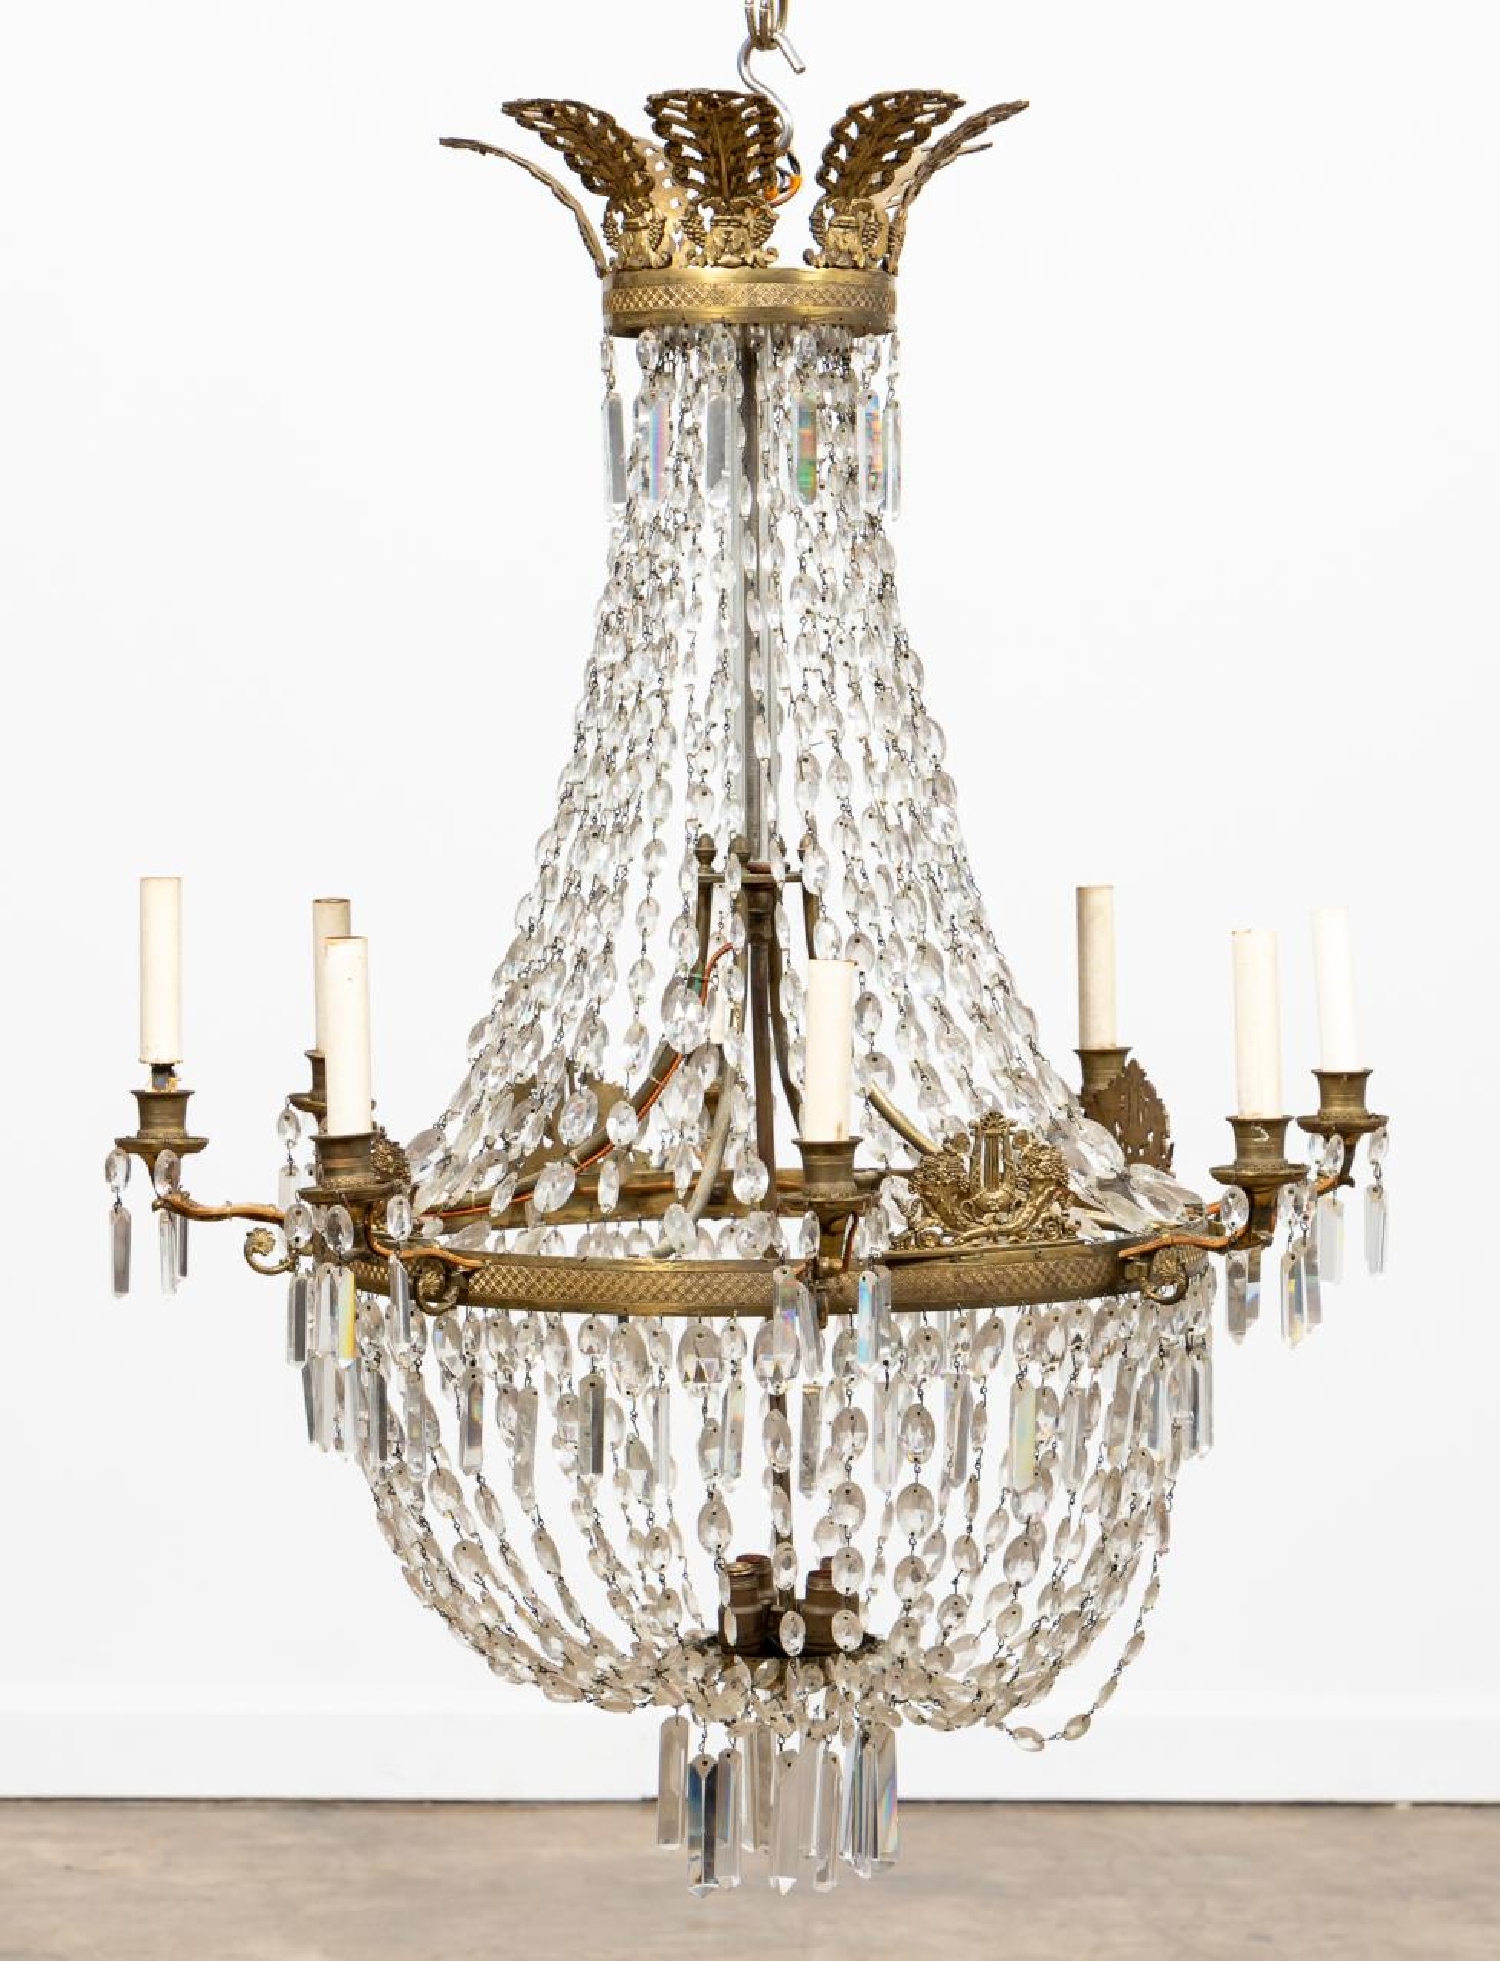 PR. EMPIRE STYLE GILT & CRYSTAL BASKET CHANDELIERS - Image 2 of 7